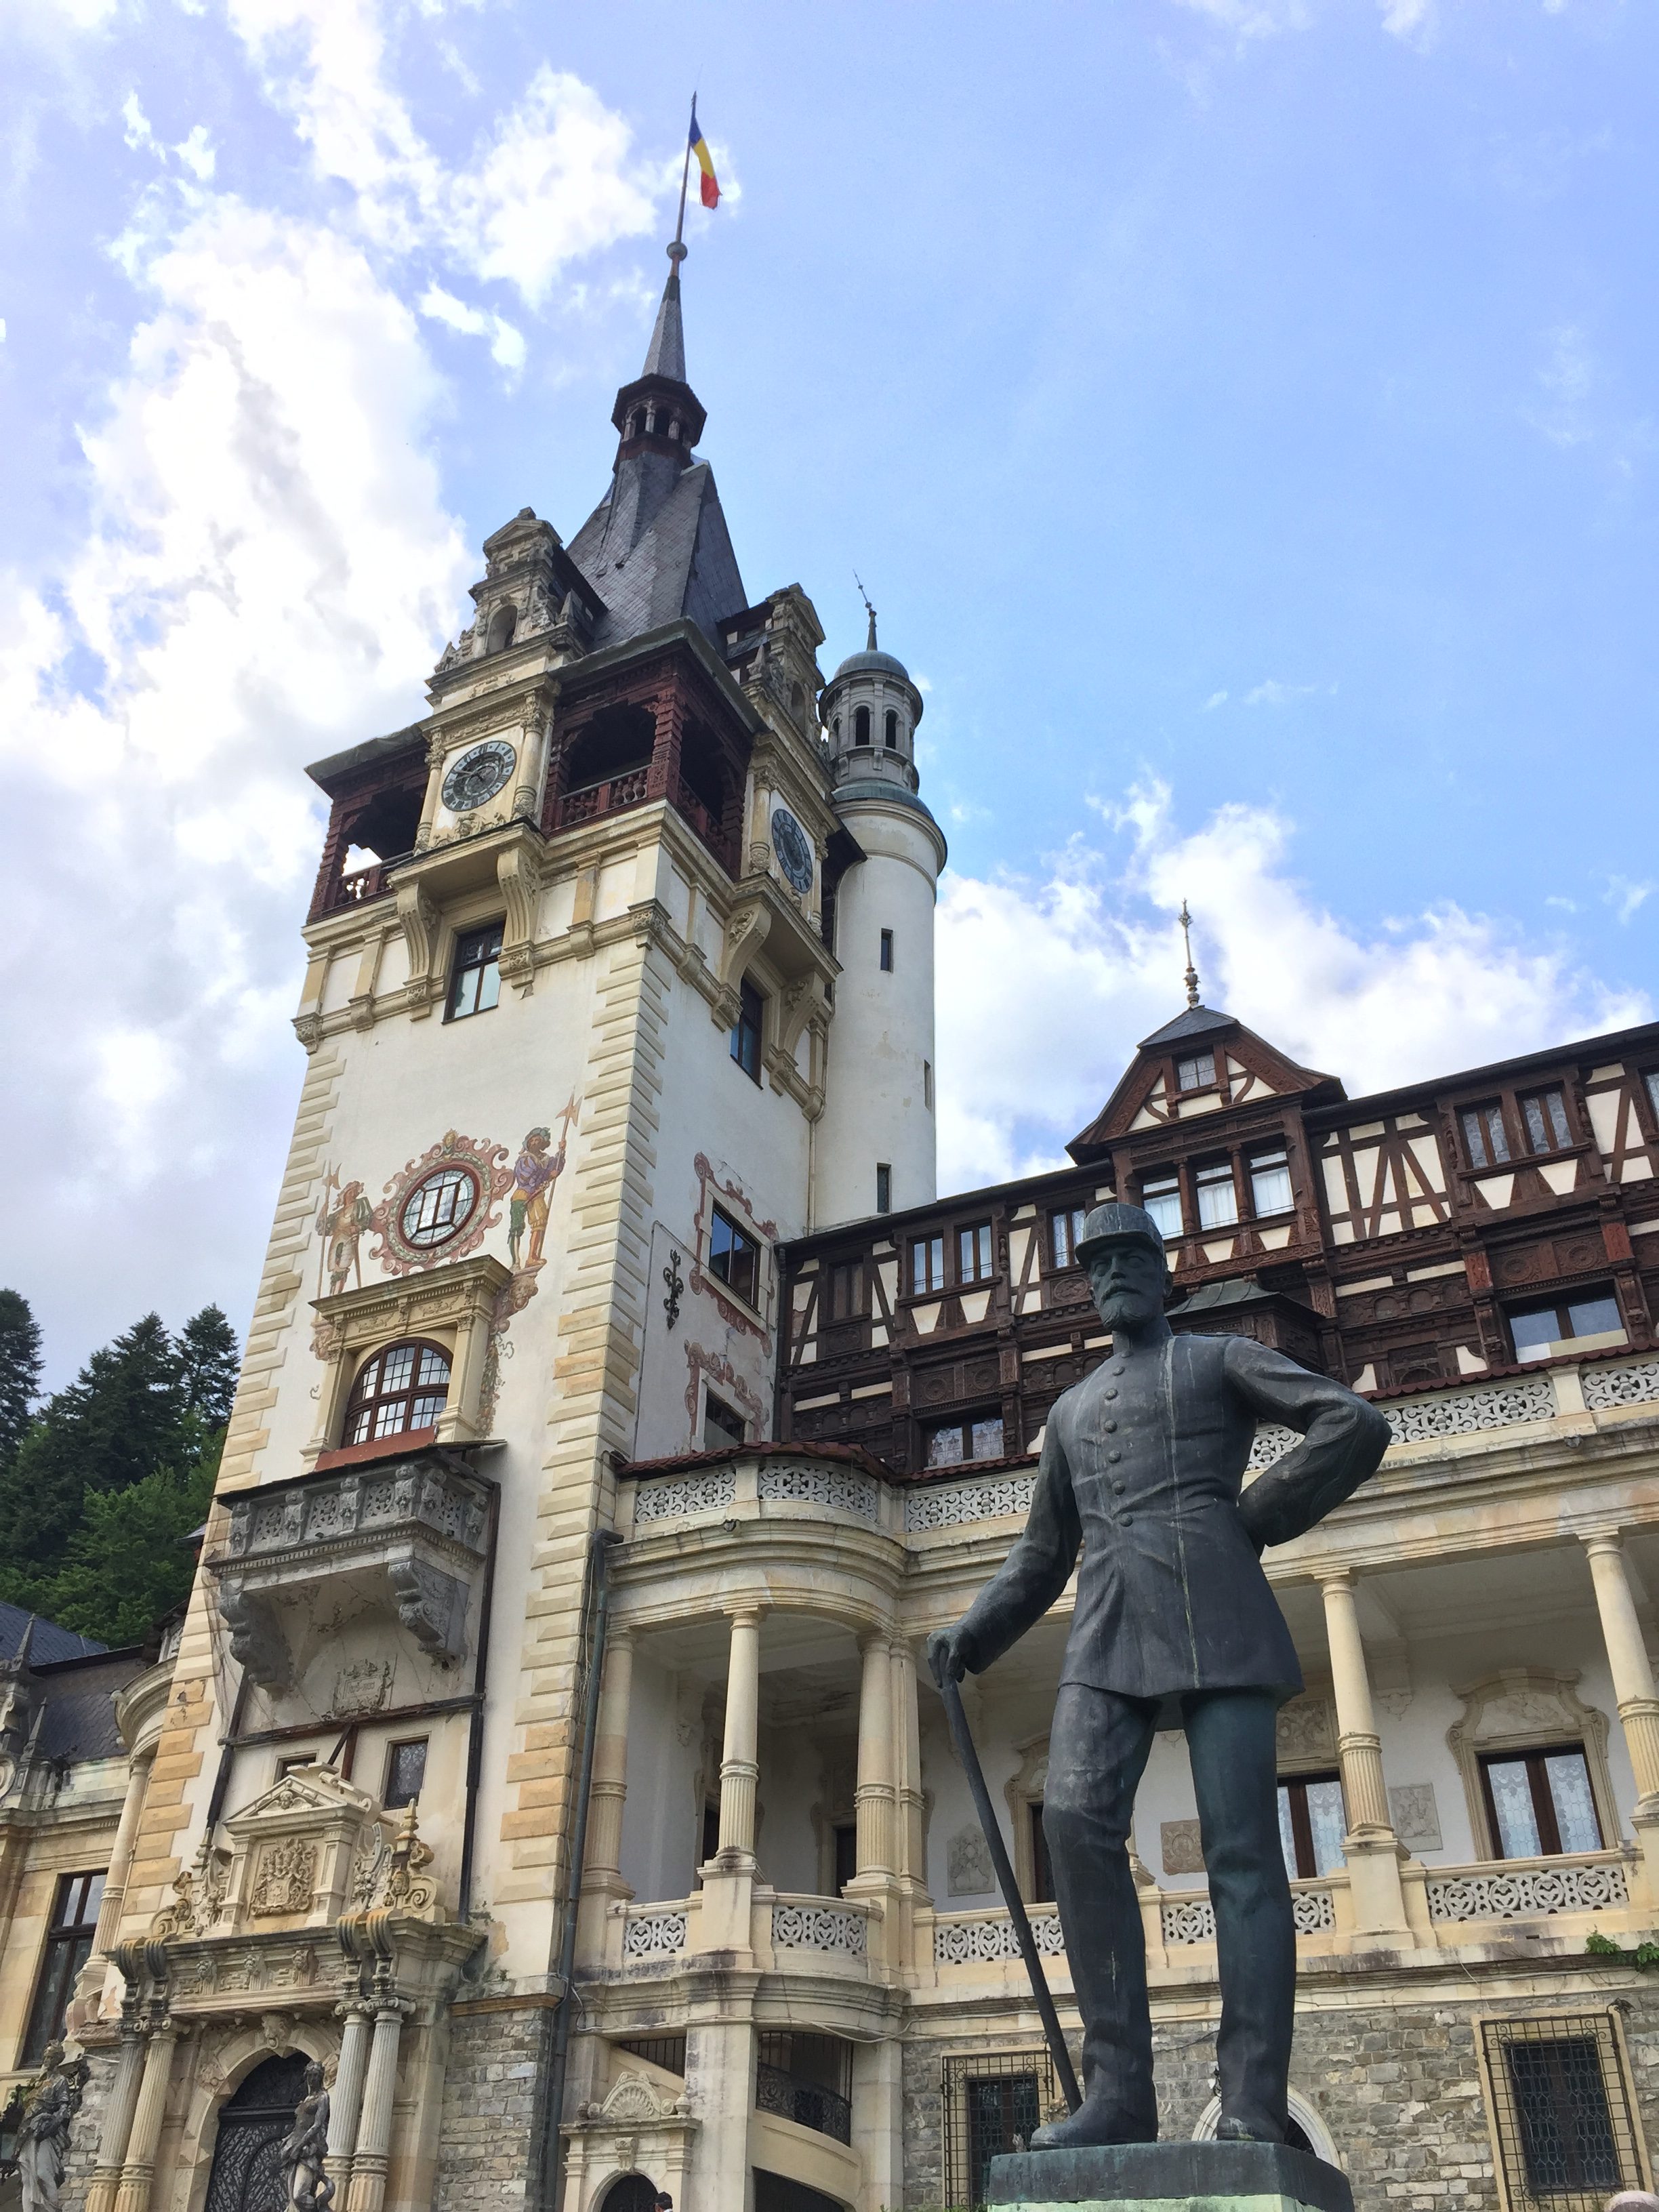 A statue in front of Peleș Castle